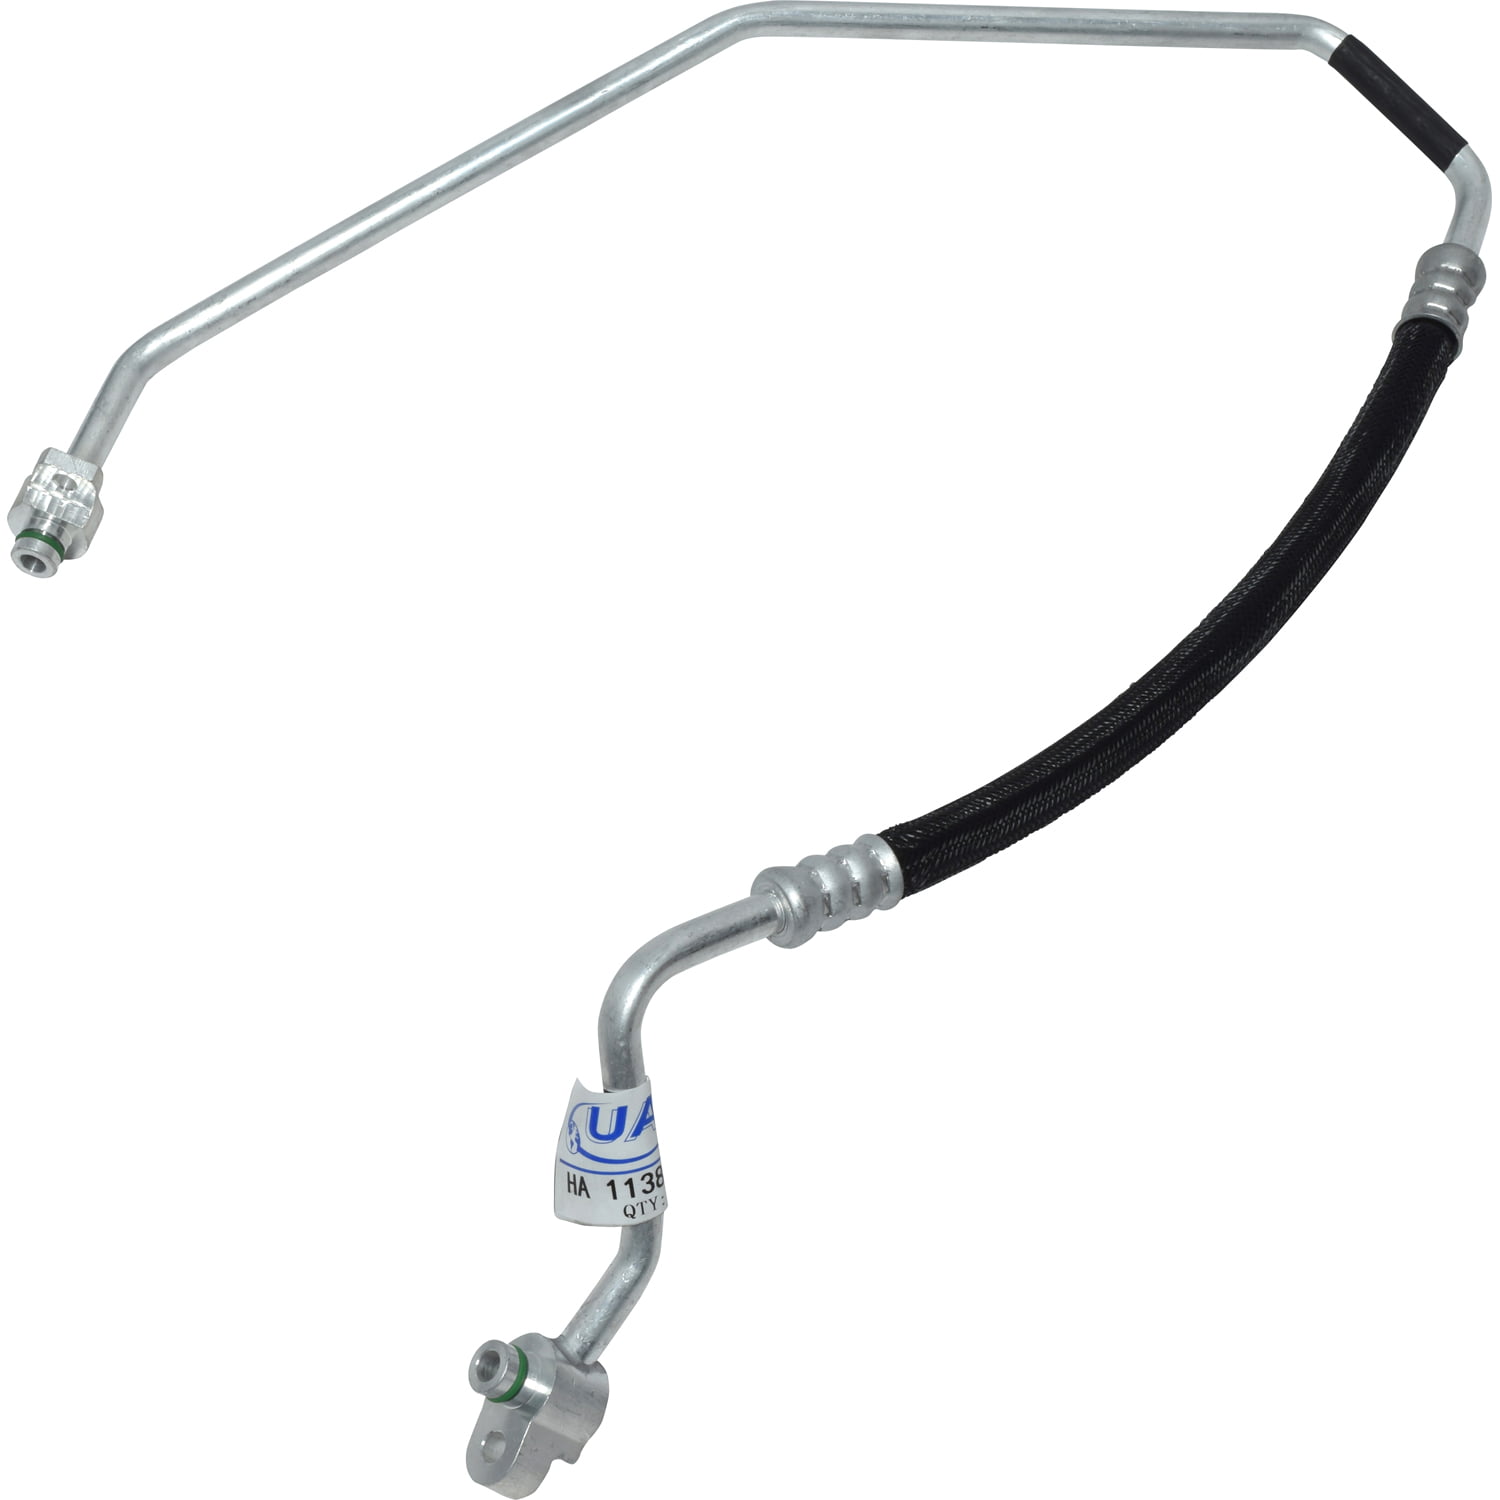 Crankcase Breather Hose with Check Valve From Vent Valve to Intake Hose Compatible with 2008-2014 Volkswagen GTI 